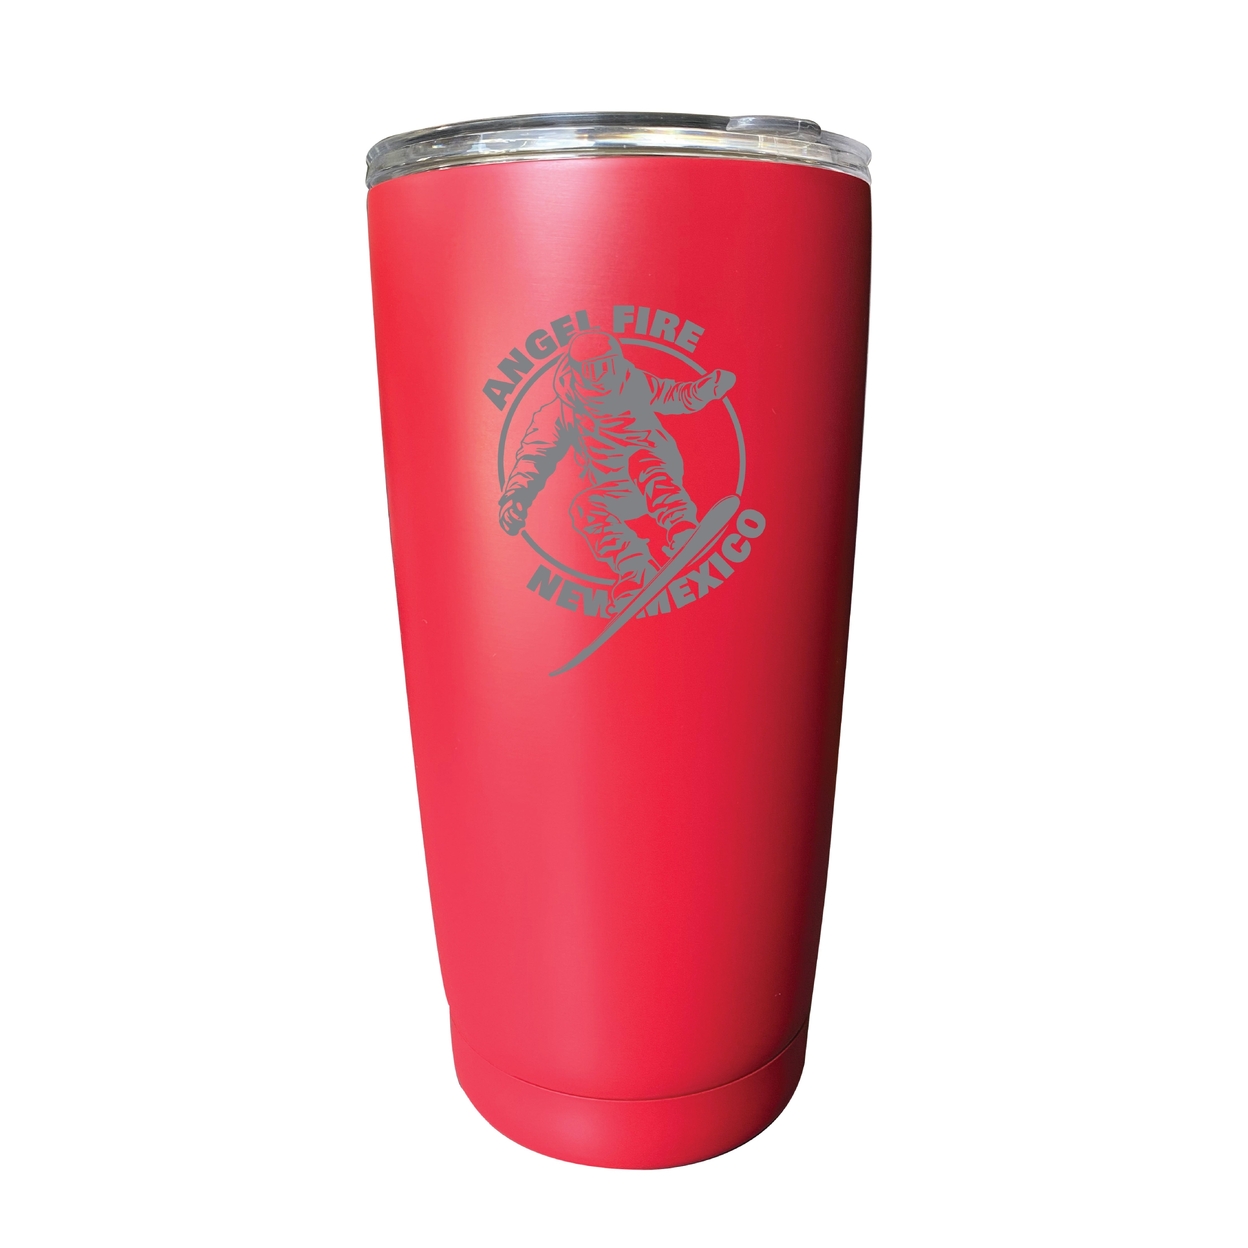 Angel Fire New Mexico Souvenir 16 Oz Engraved Stainless Steel Insulated Tumbler - Pink,,4-Pack